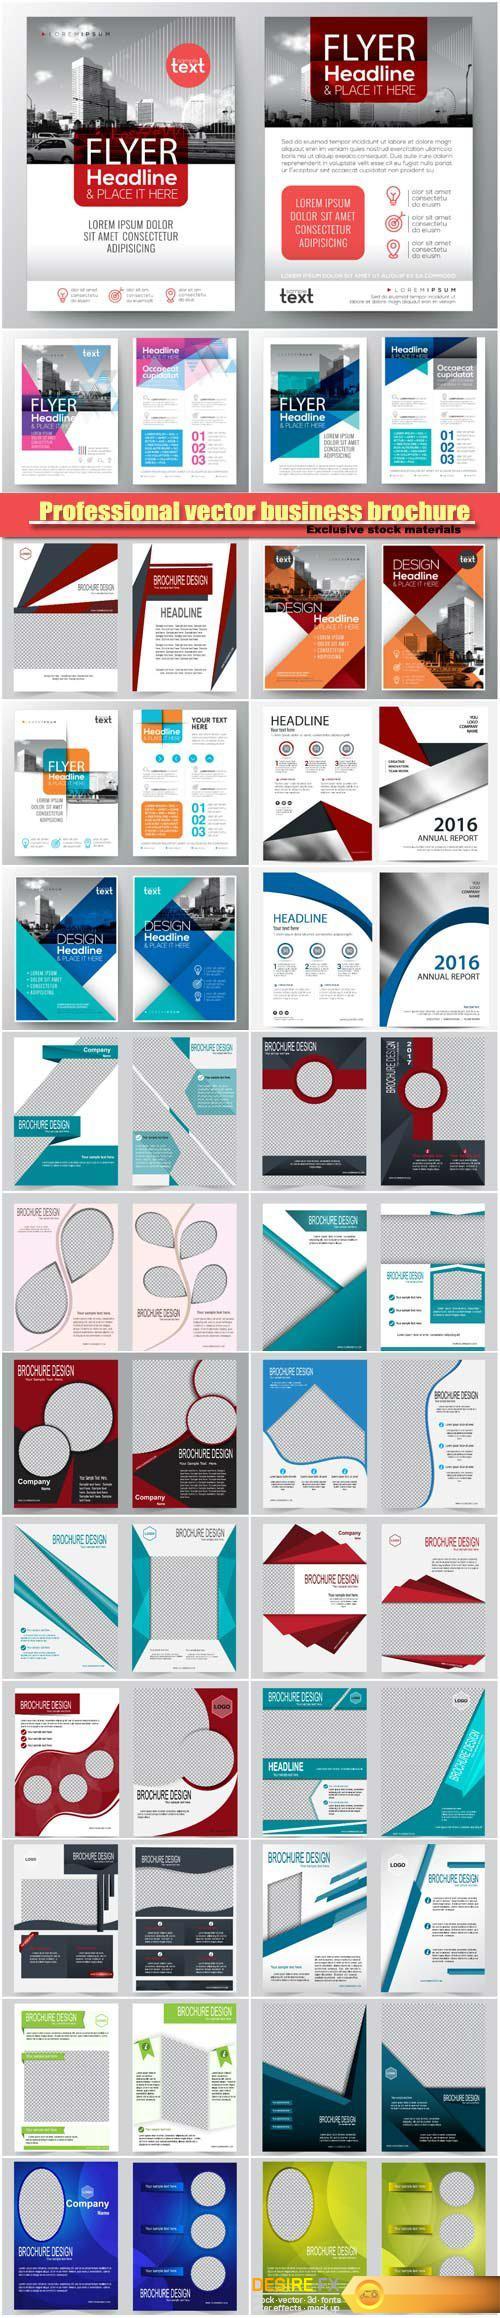 Professional vector business brochure annual report cover, flyer poster design